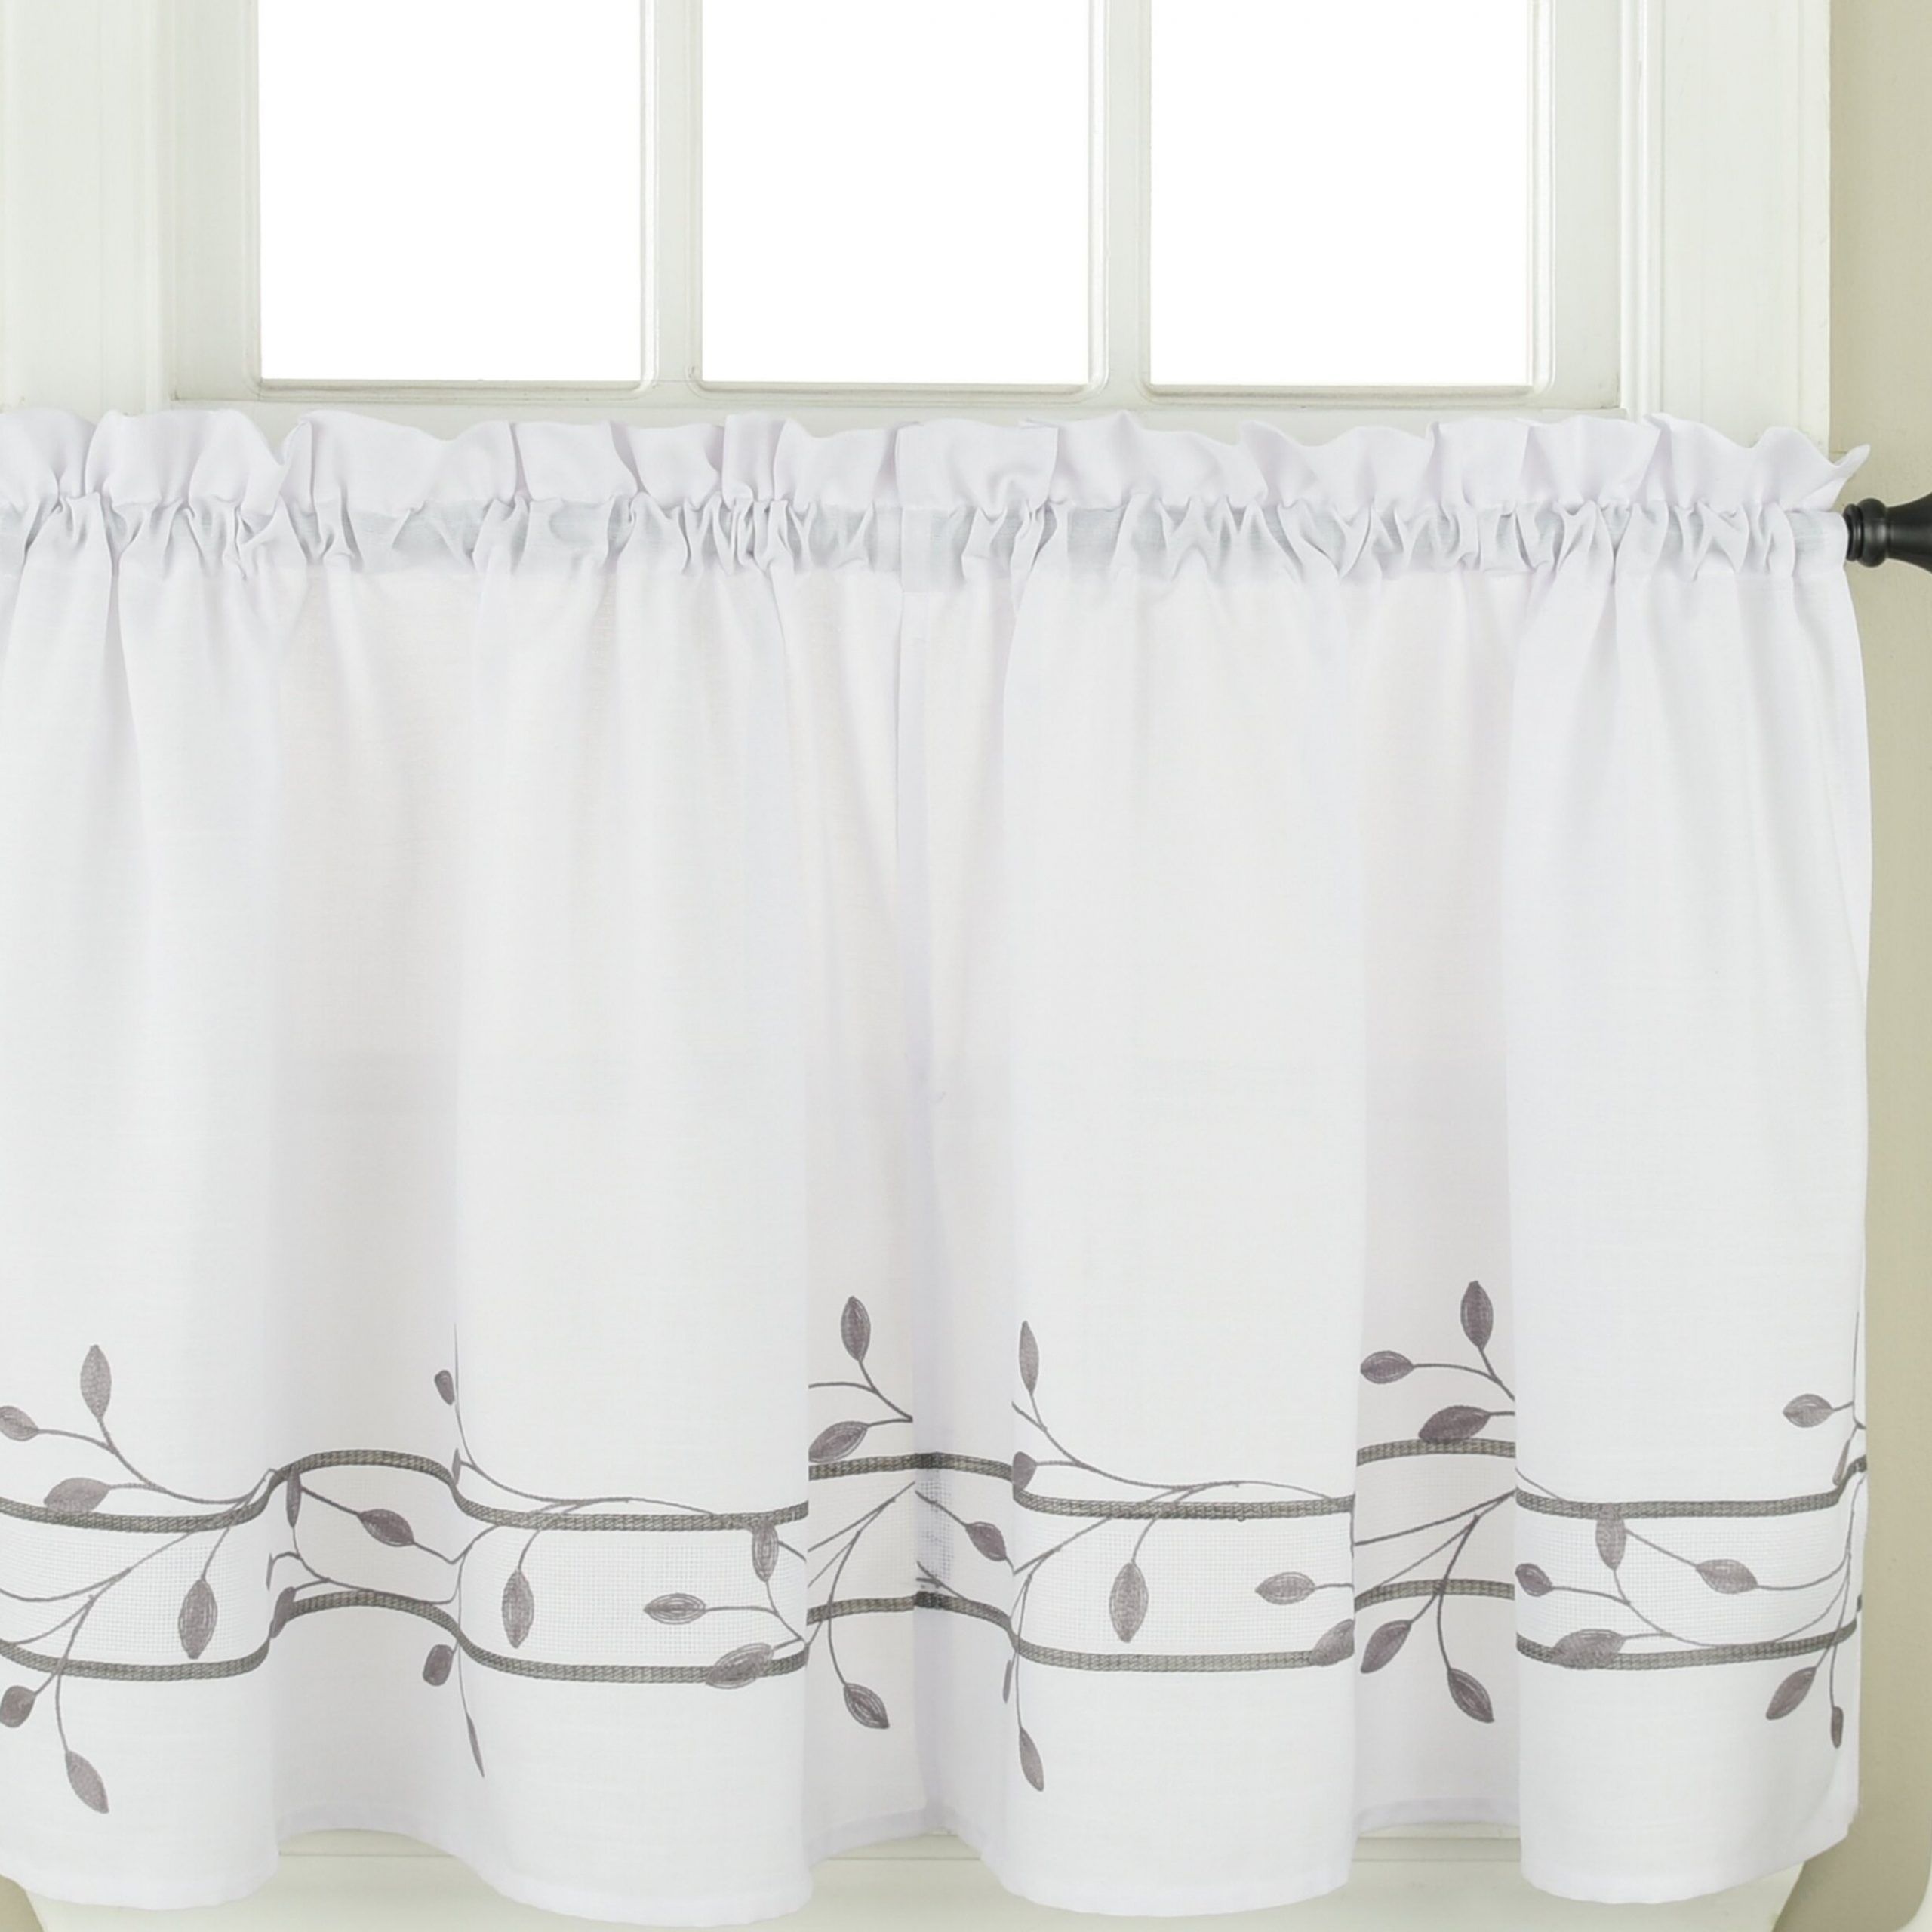 Bouck Embroidered Tier Cafe Curtain Within Fluttering Butterfly White Embroidered Tier, Swag, Or Valance Kitchen Curtains (View 9 of 20)